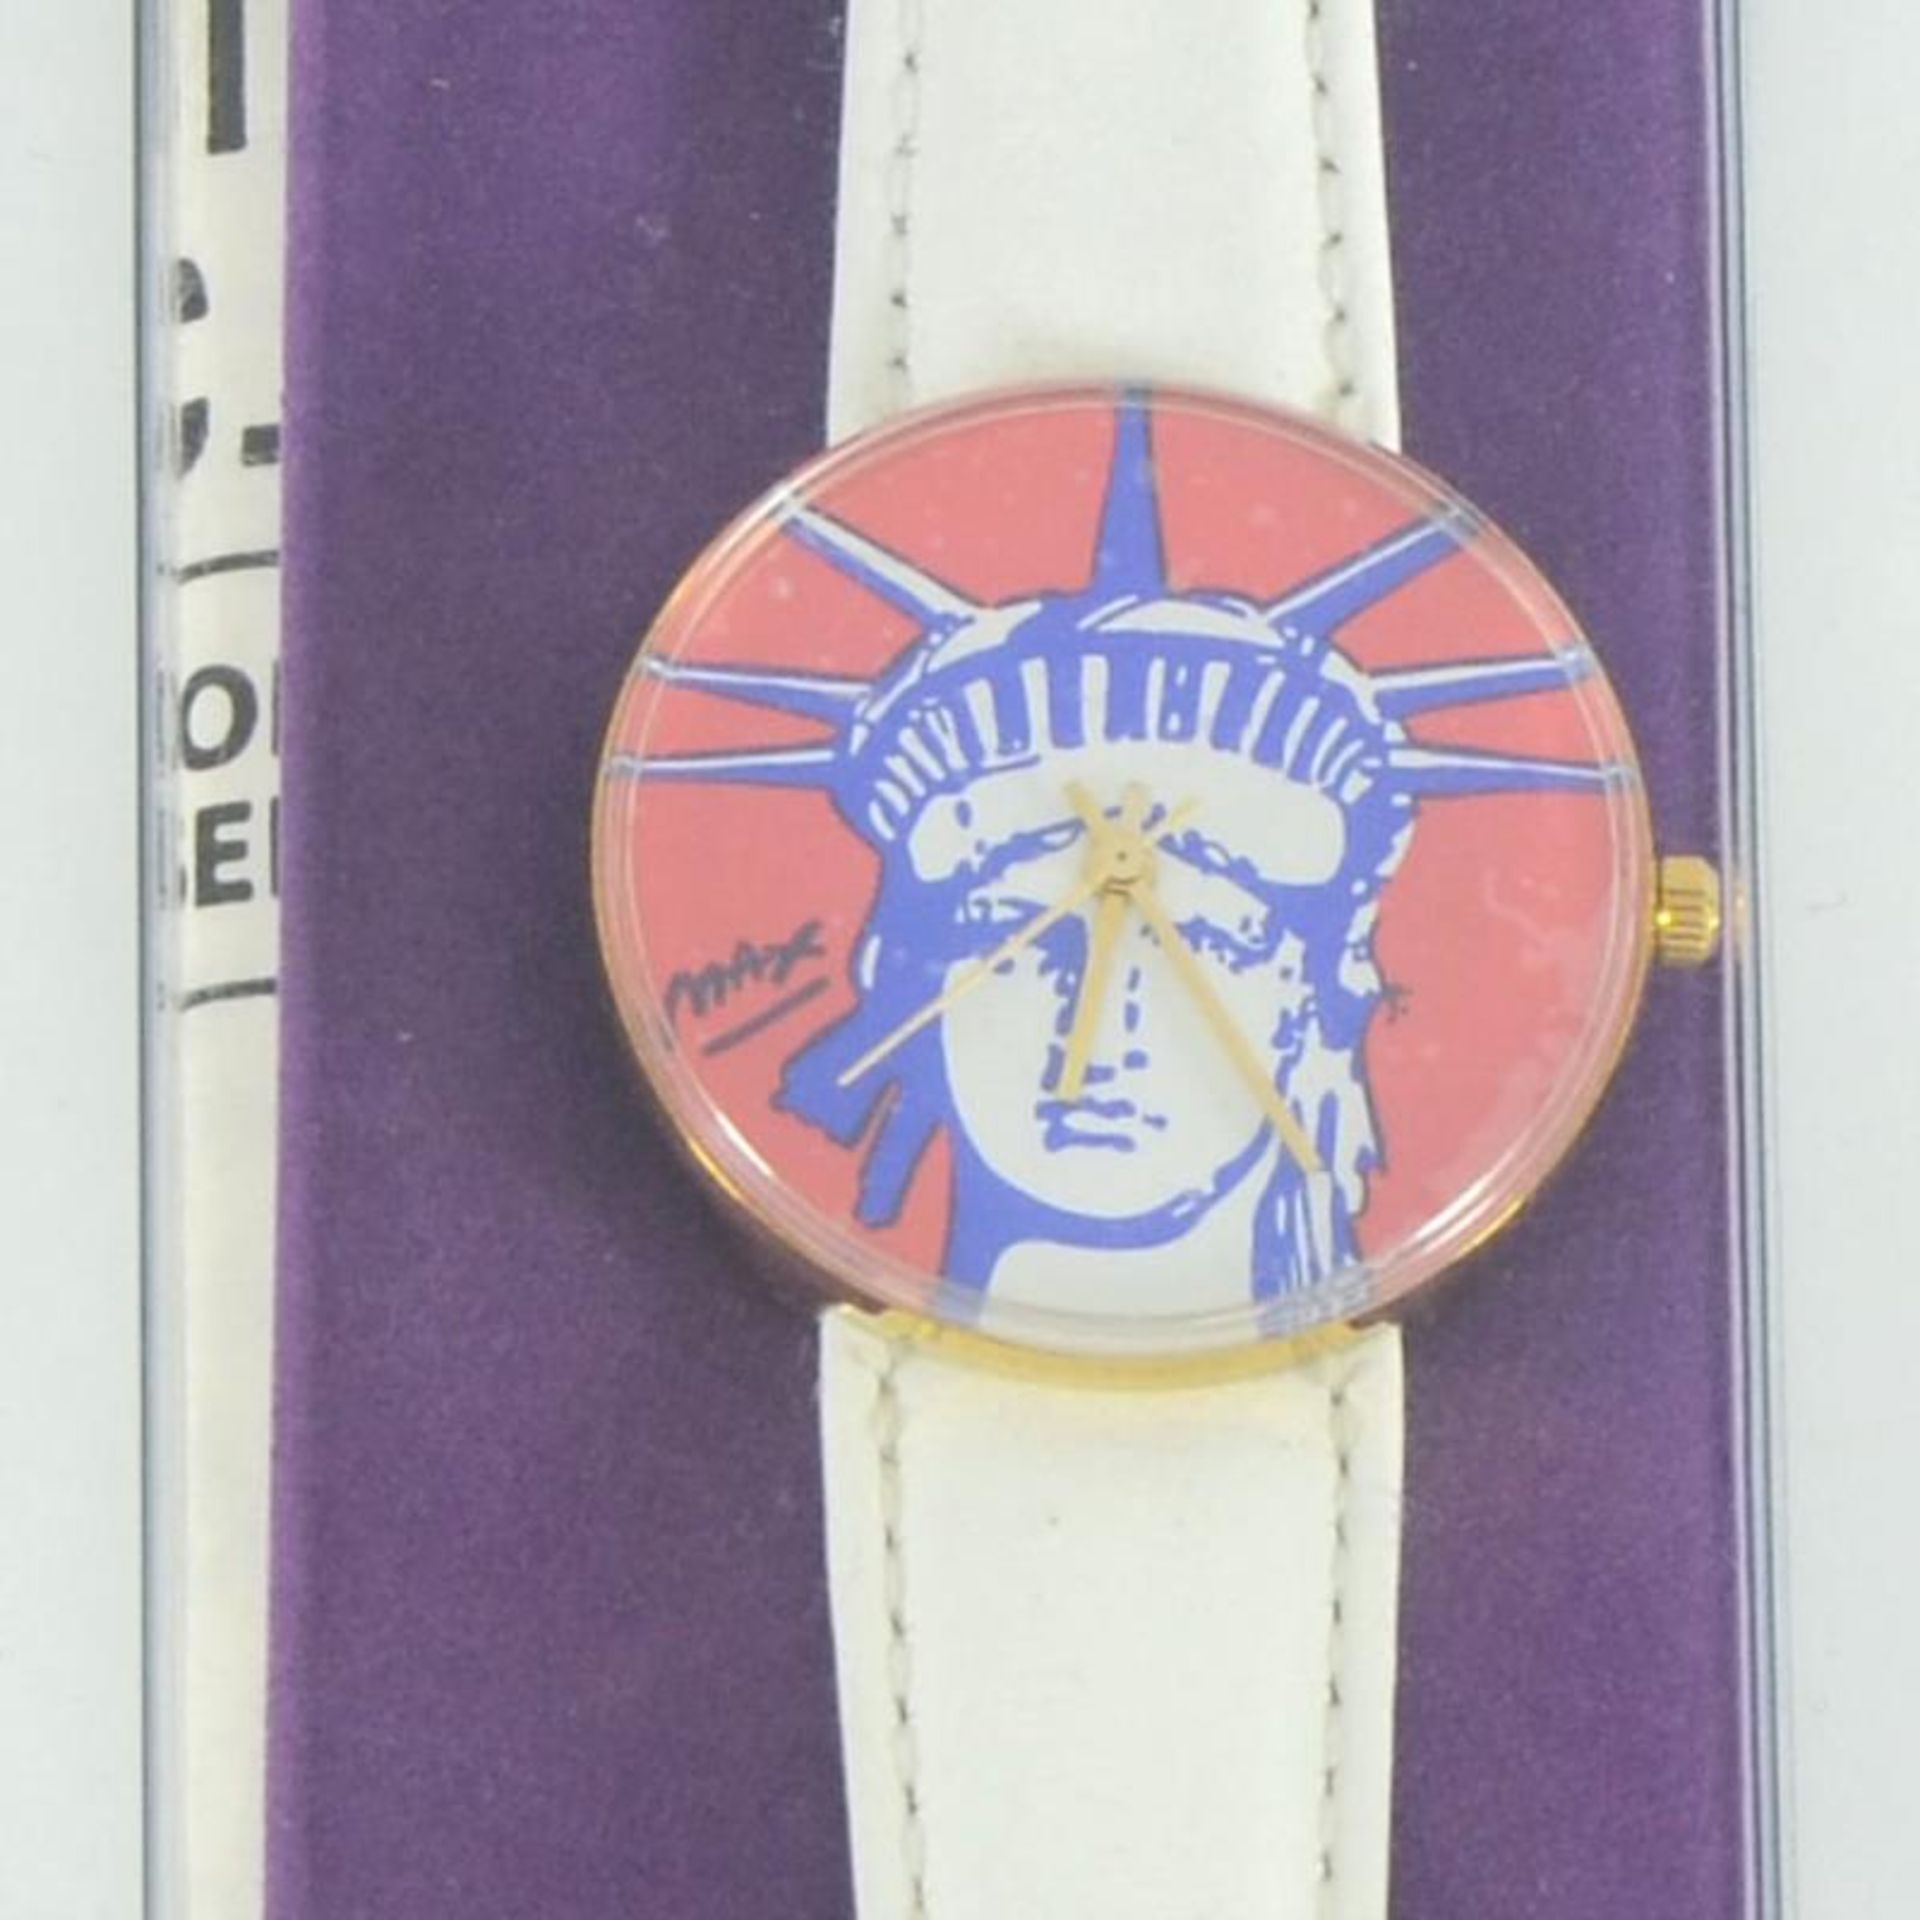 Peter Max Watch (Liberty Head) by Peter Max - Image 2 of 3